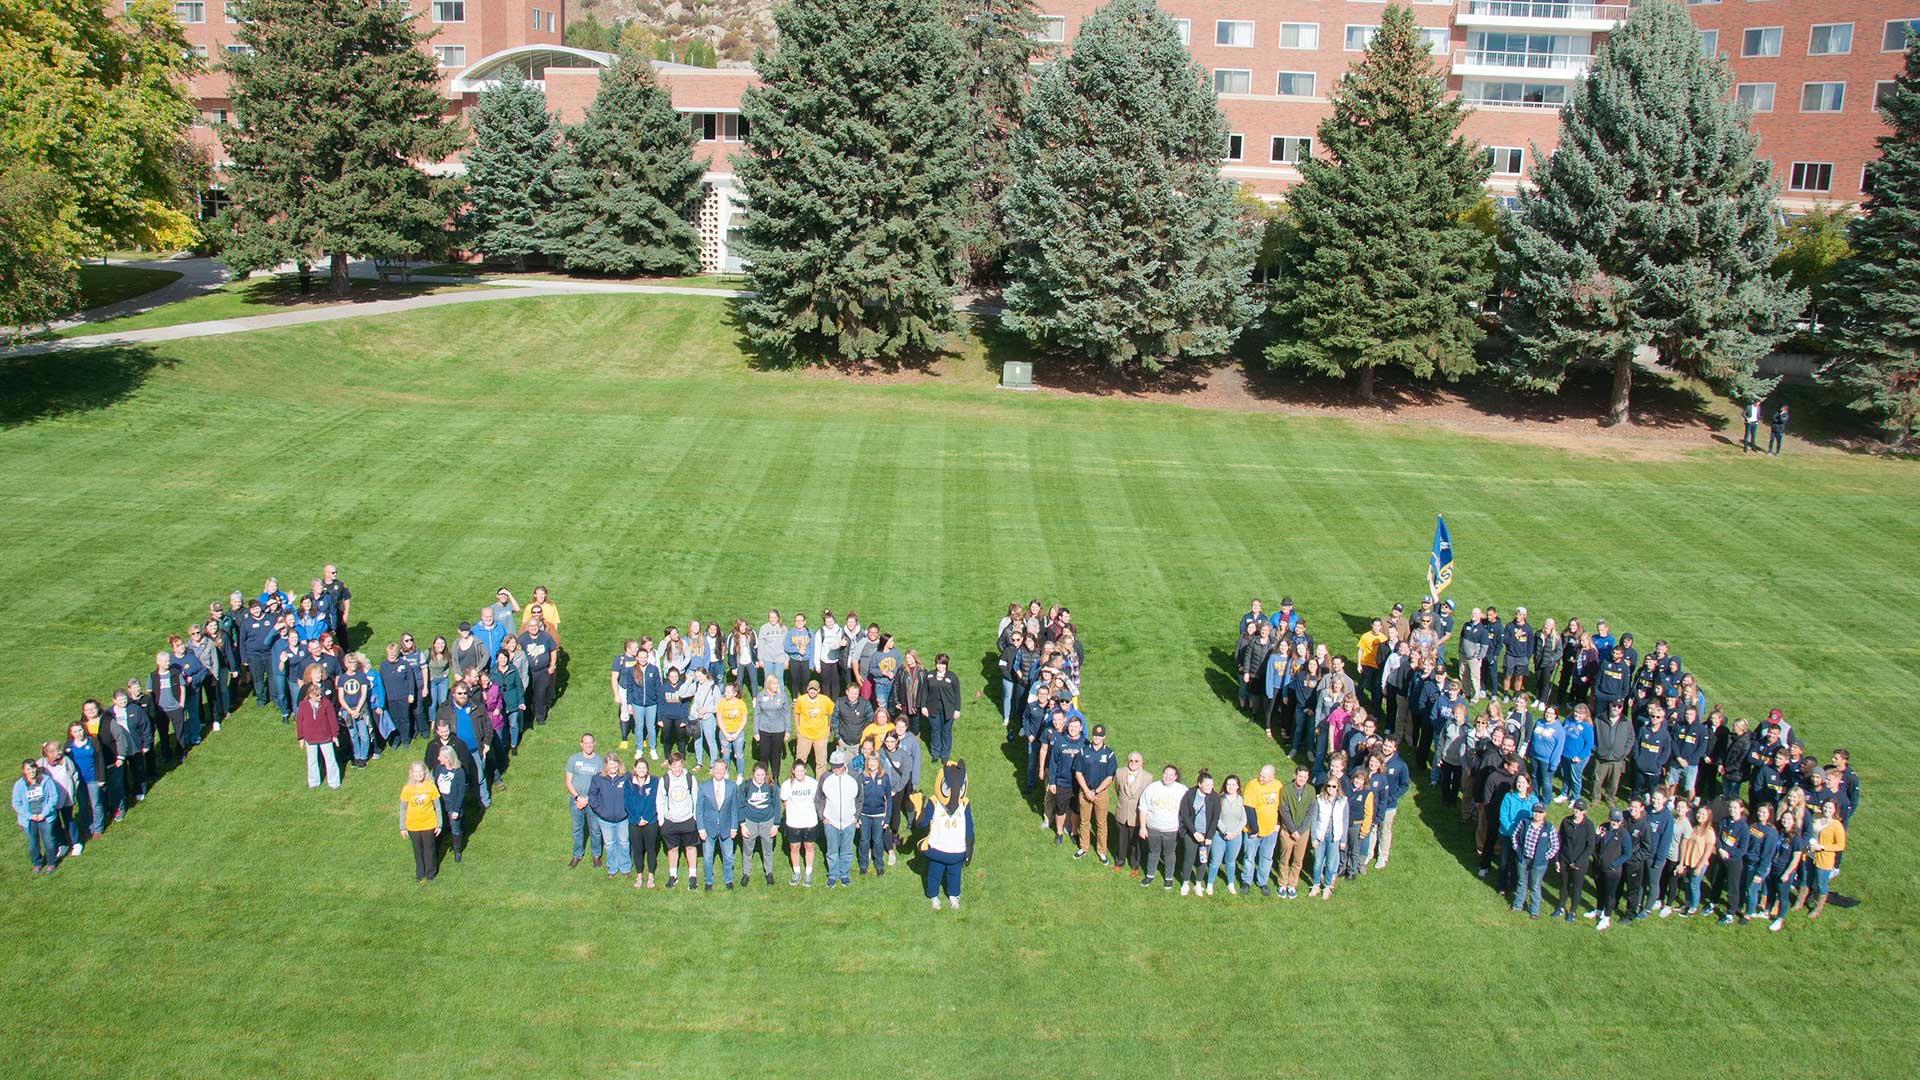 MSUB "swarm" - students, faculty, and staff spell out MSUB on the lawn